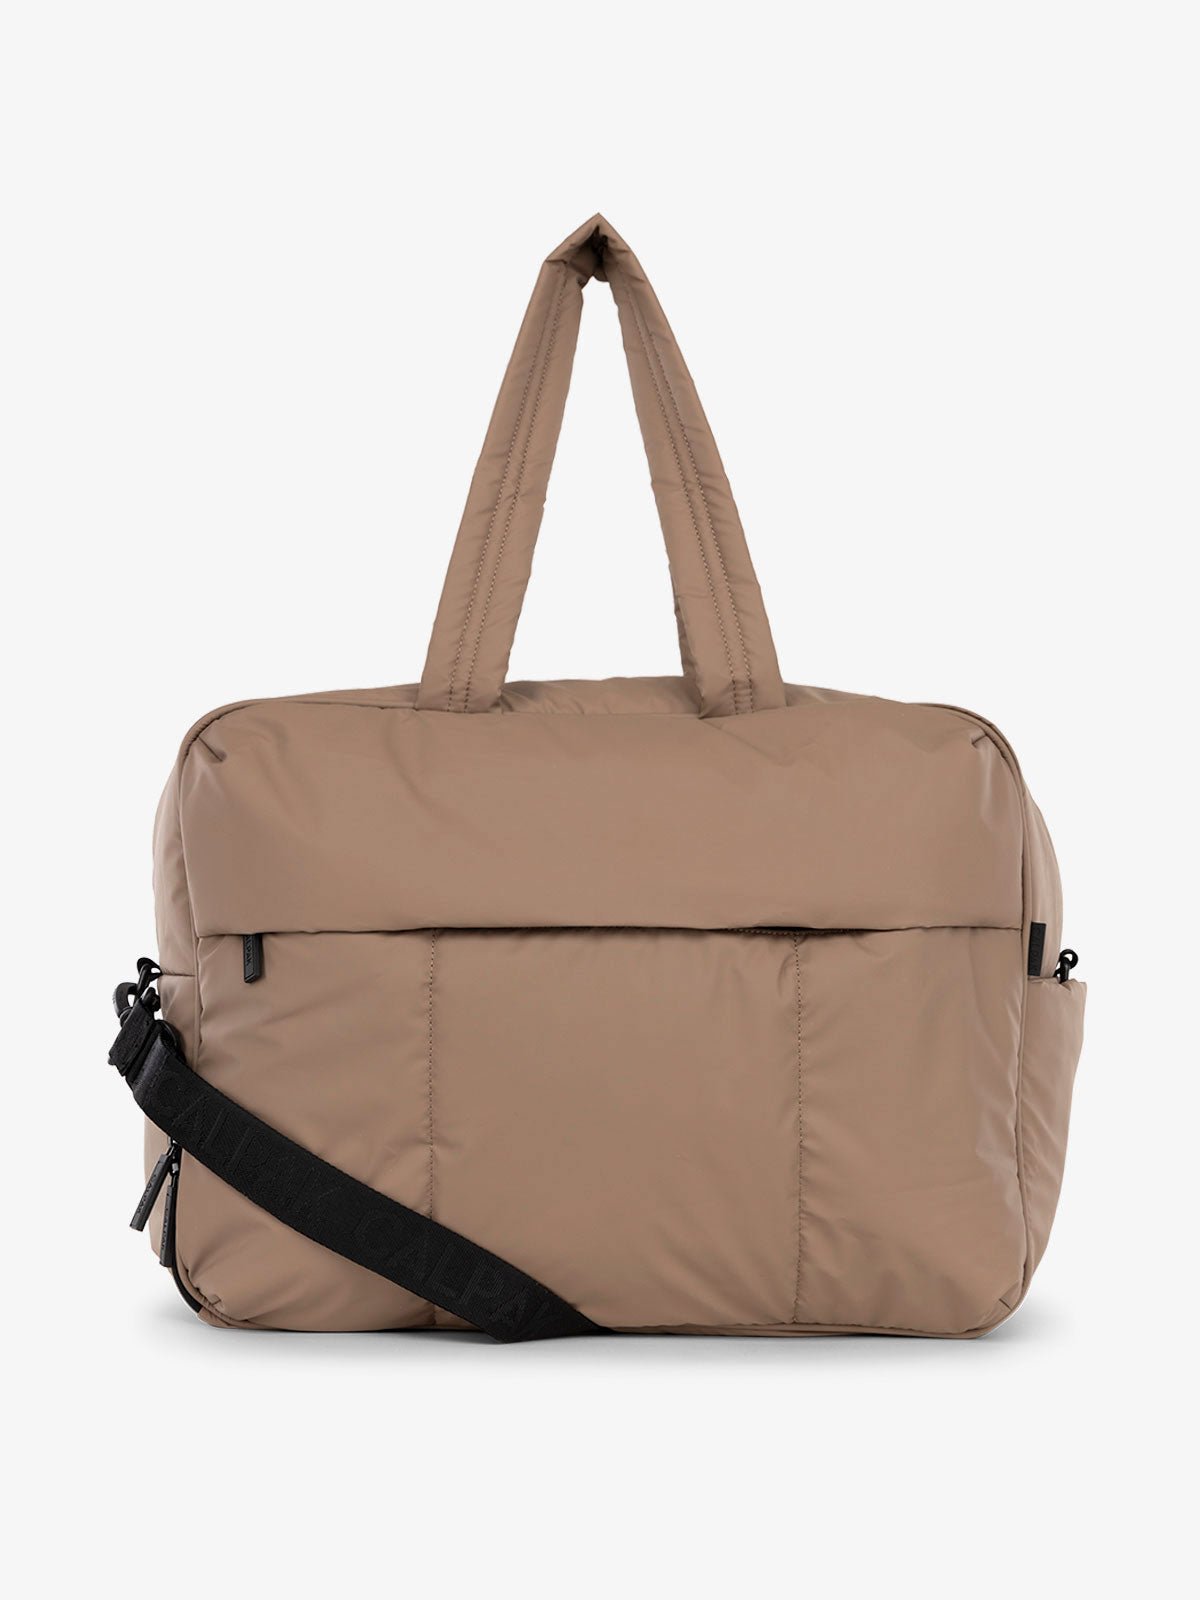 CALPAK Luka large duffle bag with detachable strap and zippered front pocket in chocolate